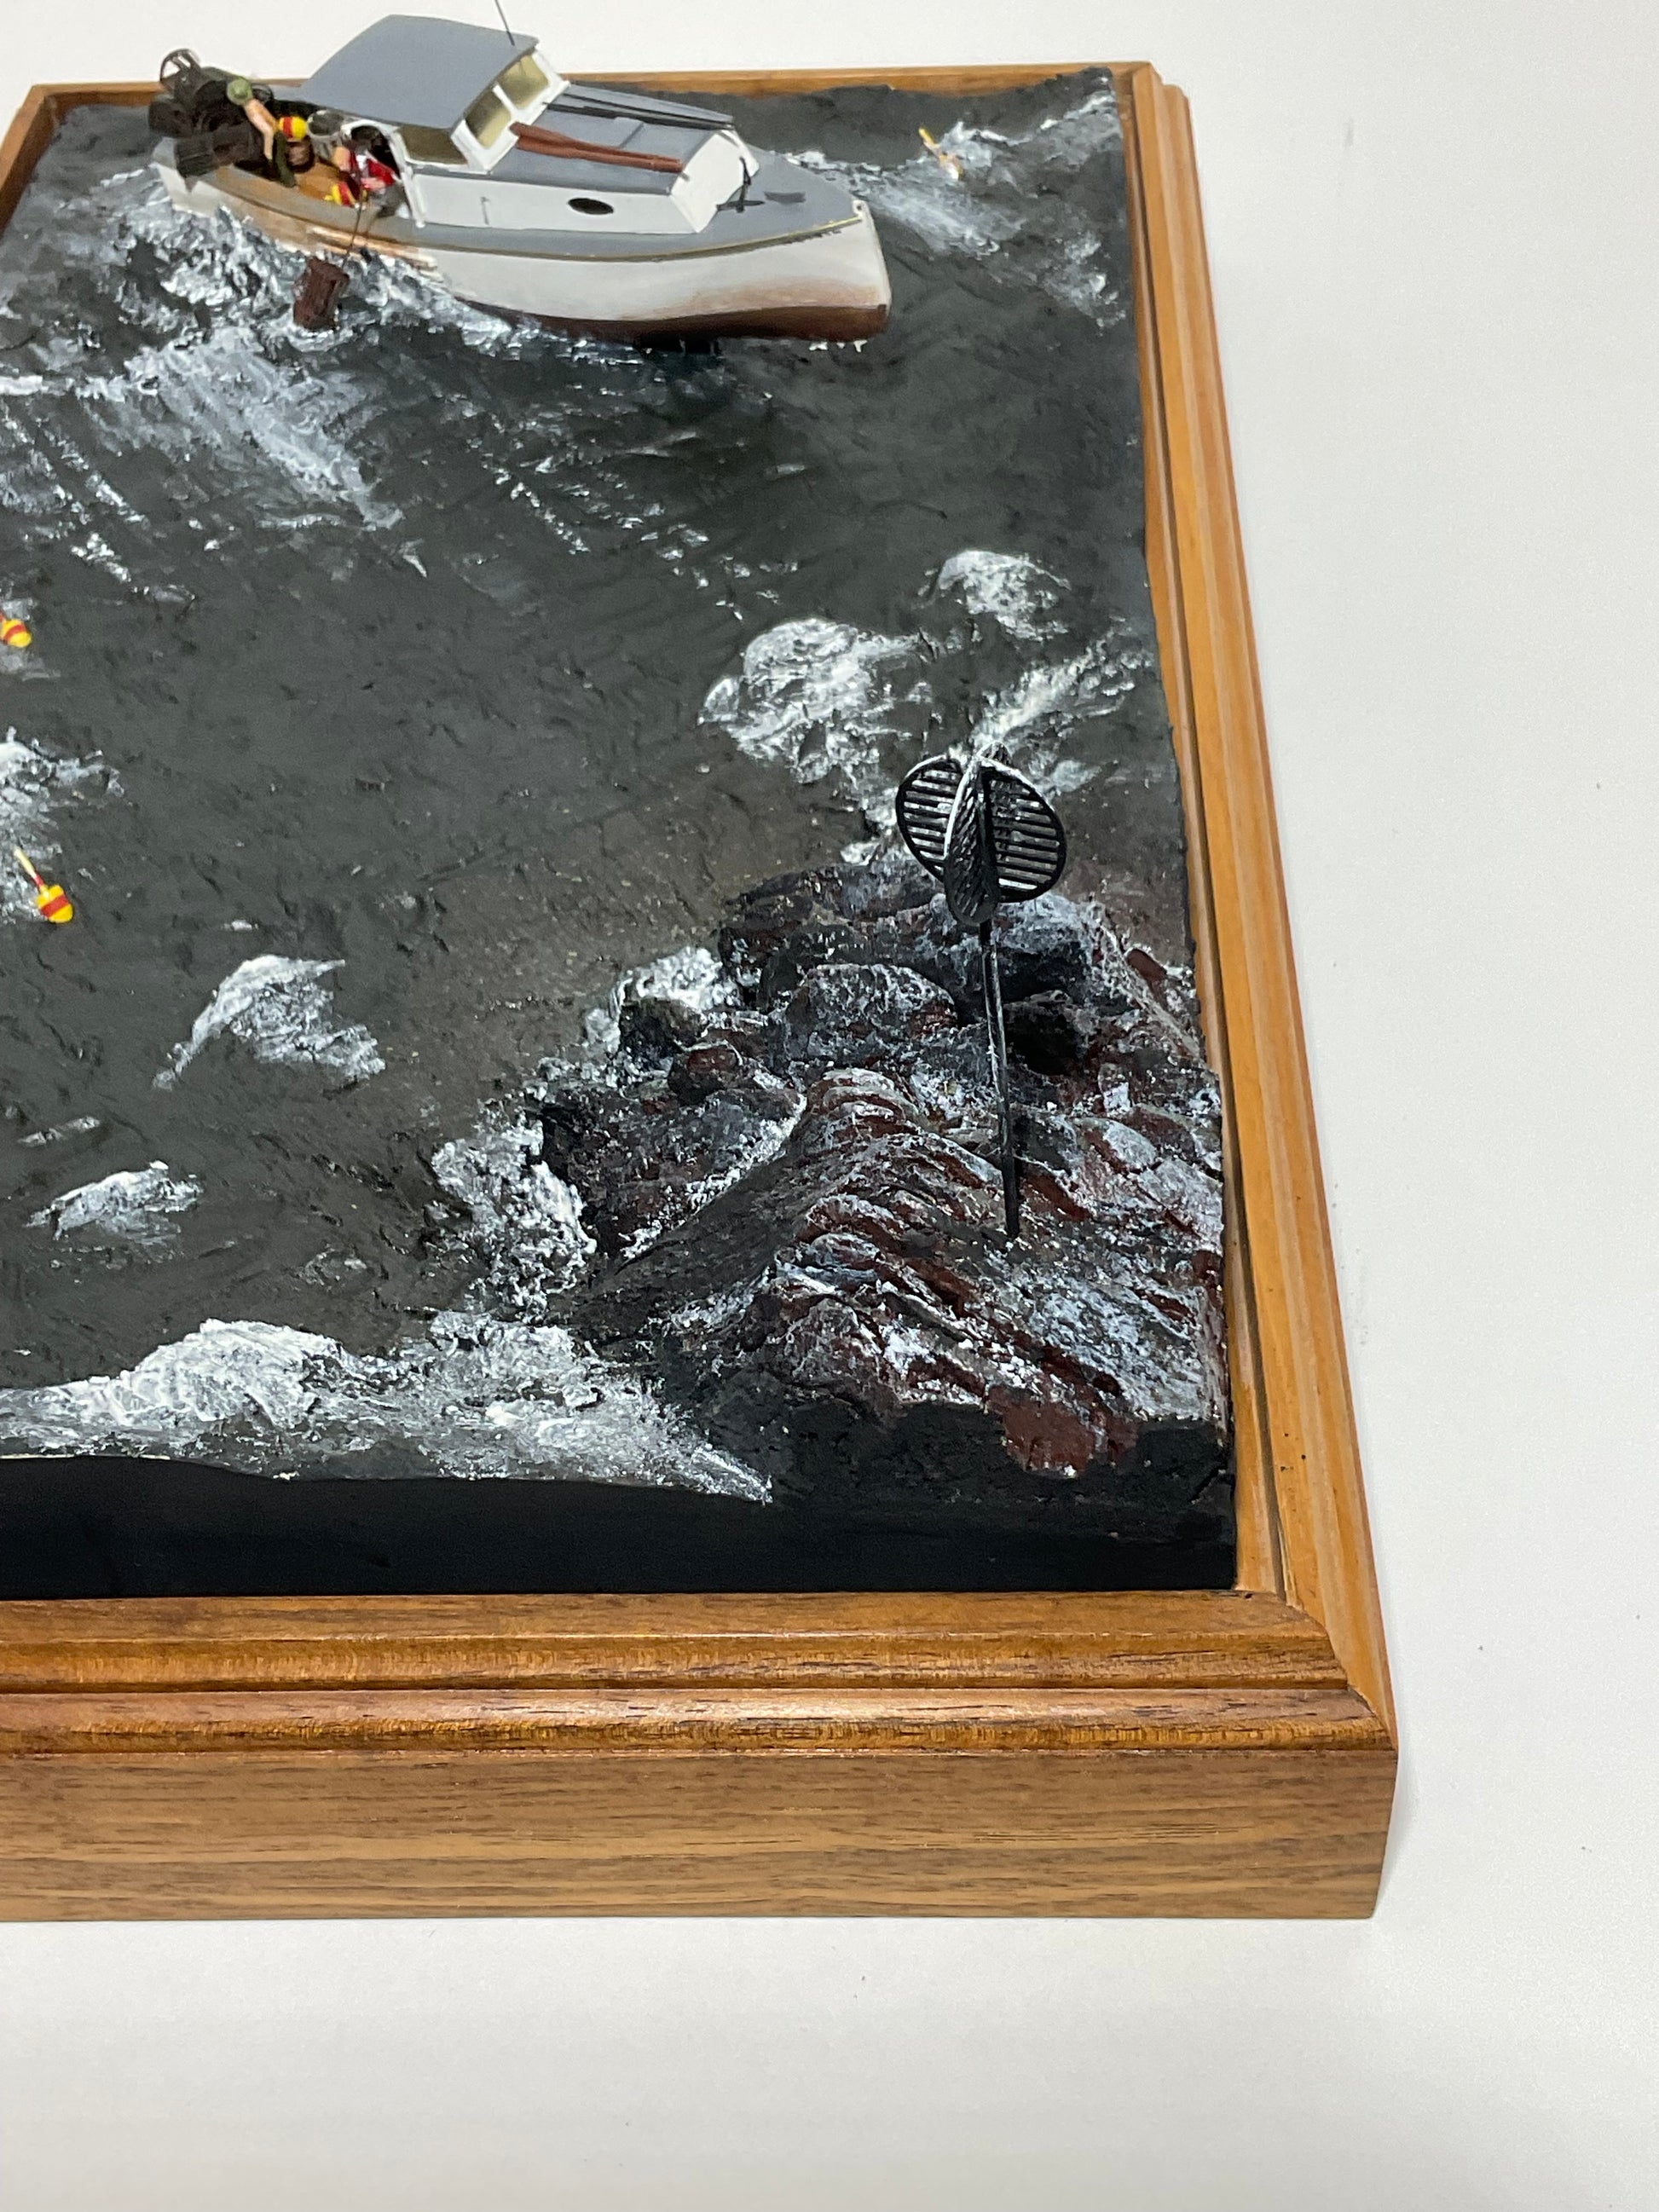 Lobster Boat Diorama Titled Hauling the Catch – Lannan Gallery